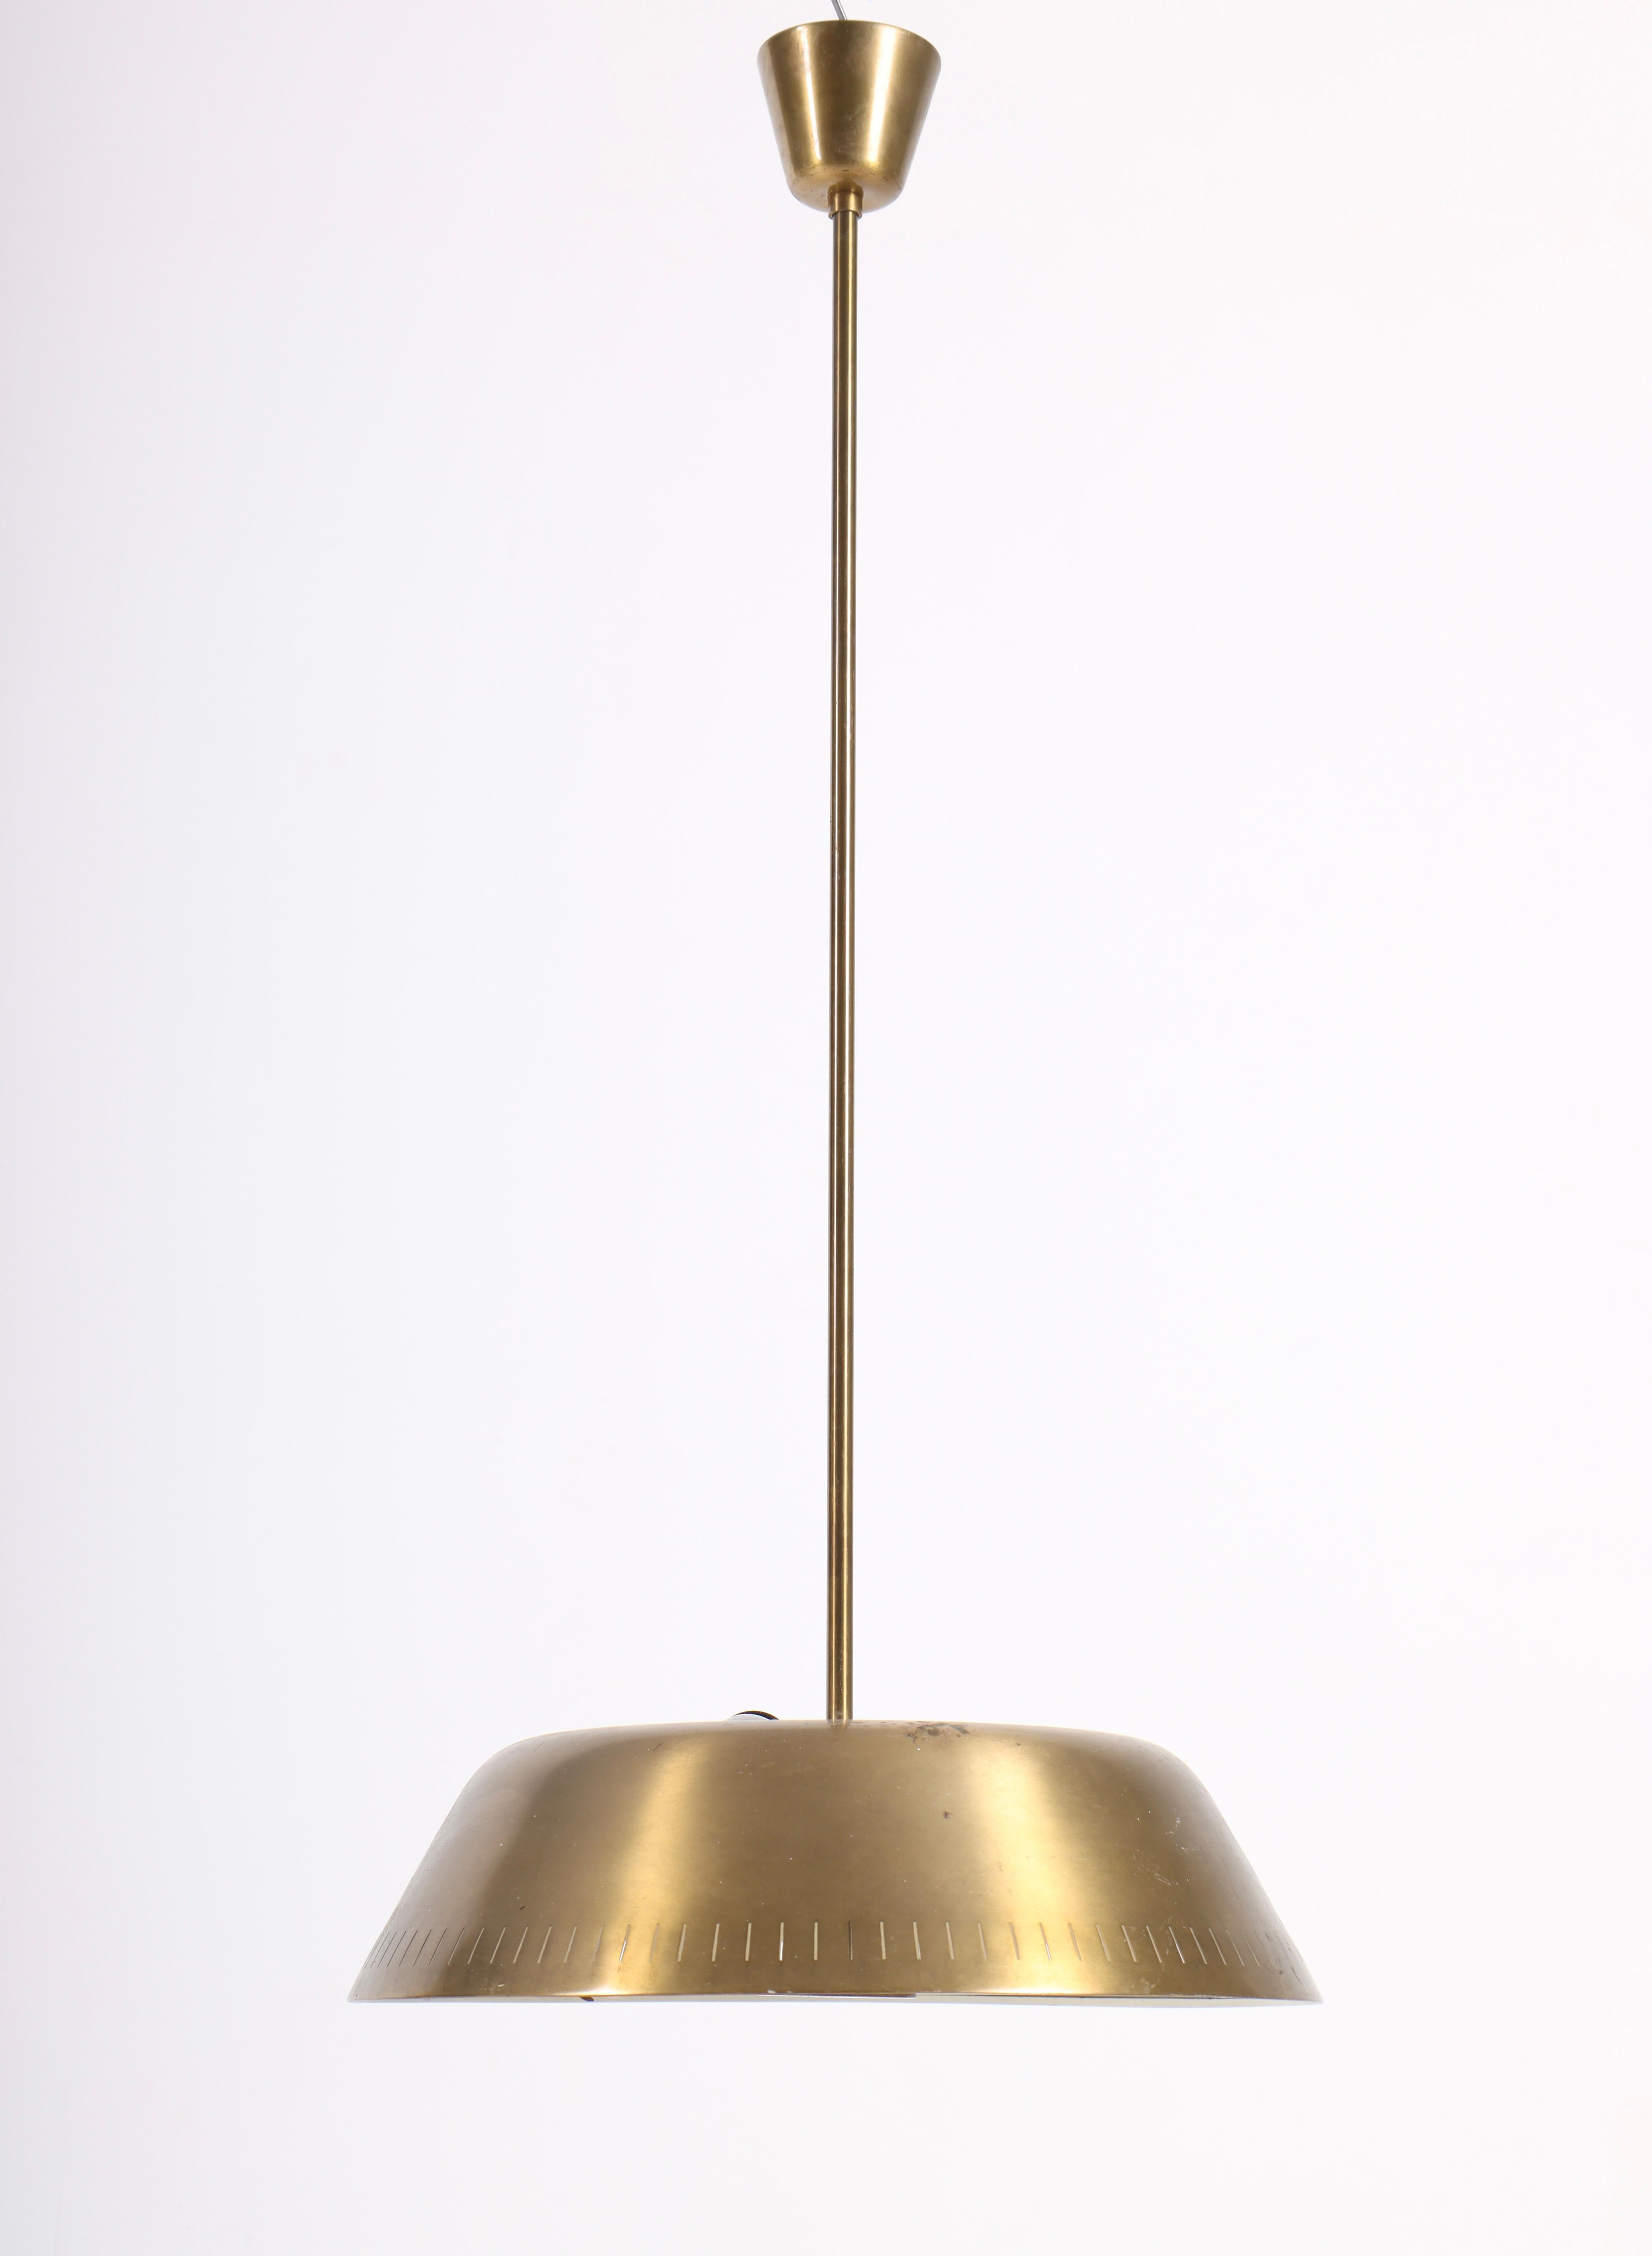 Great looking ceiling lamp in brass with glass shade. Designed by Harald Notini and made by Arvid Böhlmarks Lampfabrik, Sweden.


